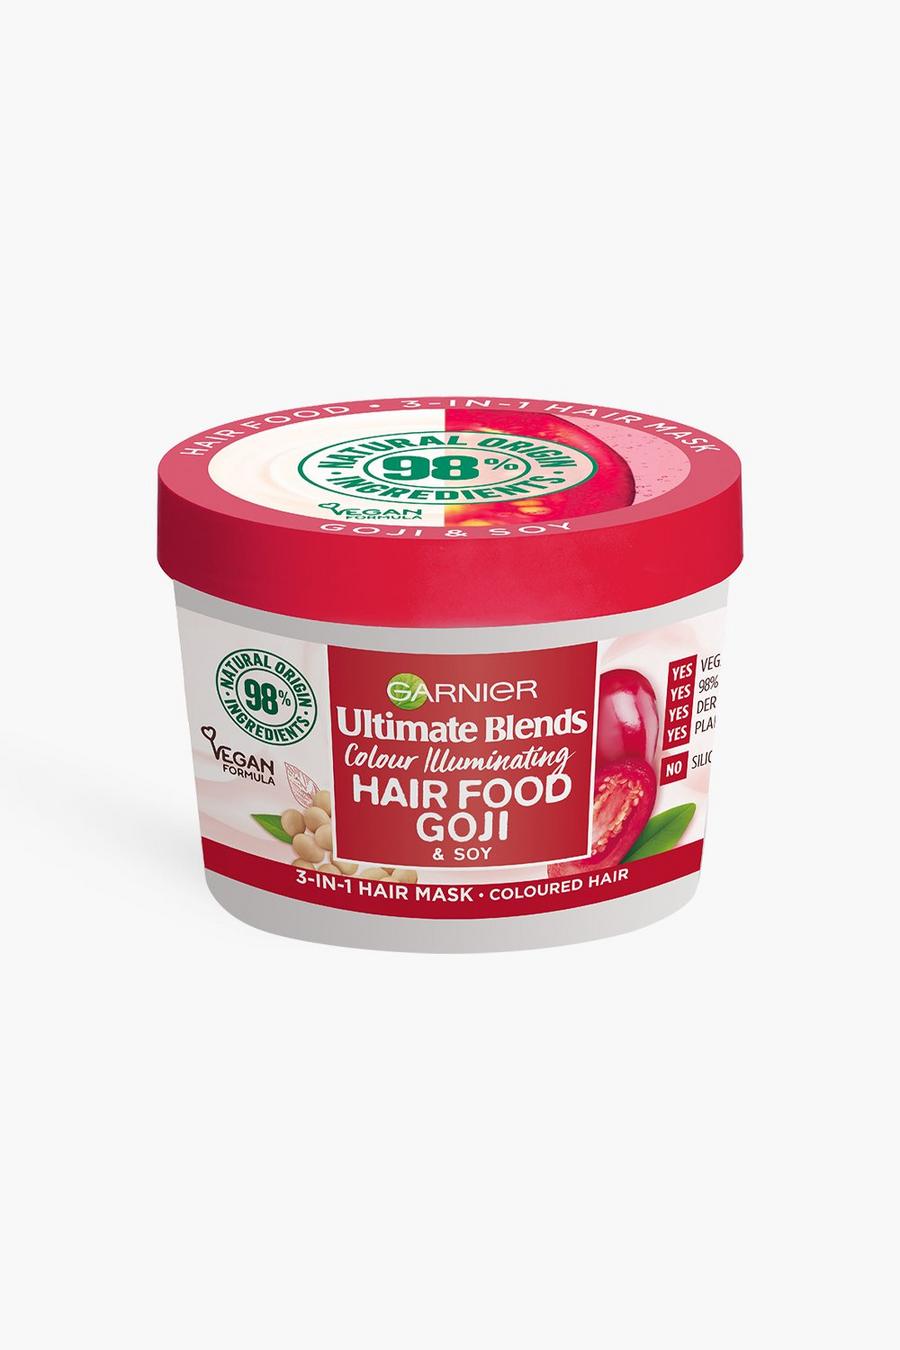 Red Garnier Ultimate Blends Hair Food Goji 3-in-1 Hair Mask Treatment For Coloured Hair 390ml image number 1